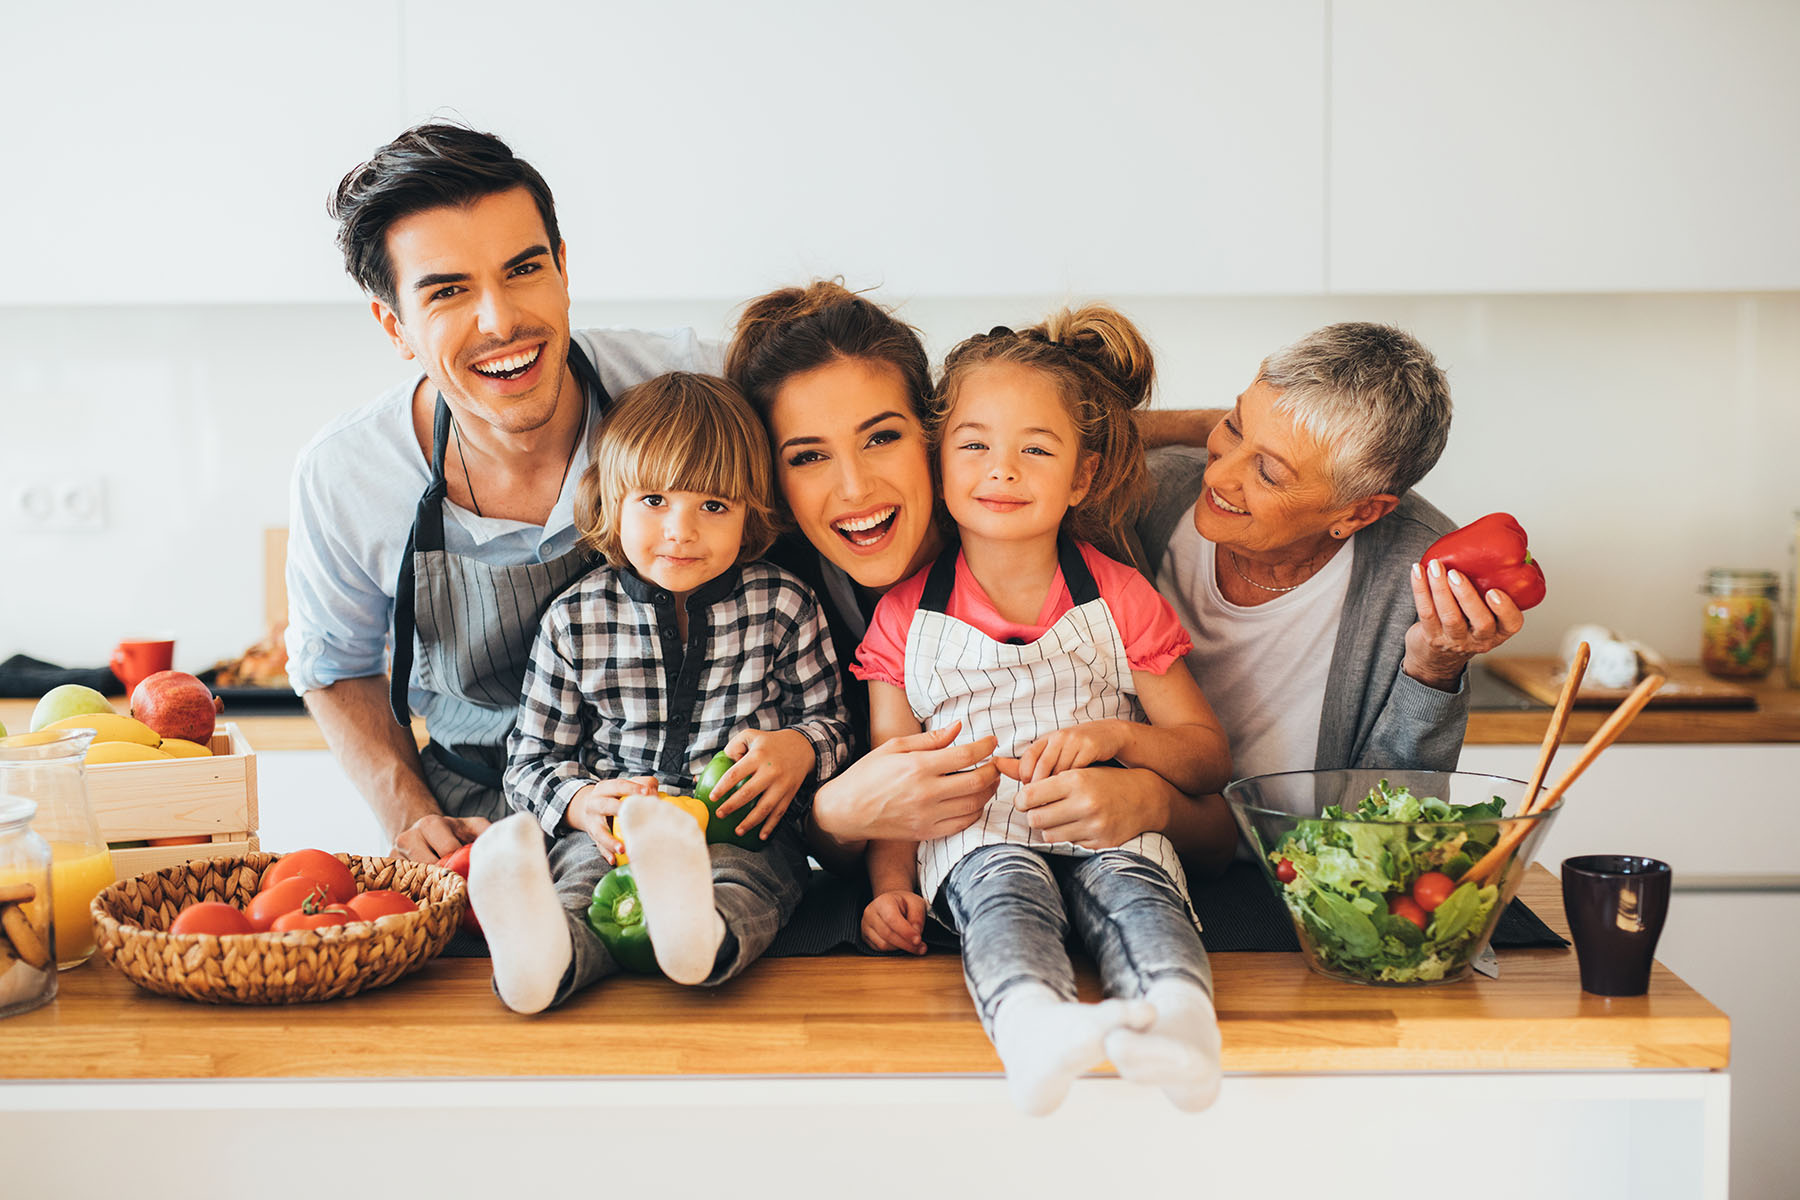 Smiling family in the kitchen with healthy food.